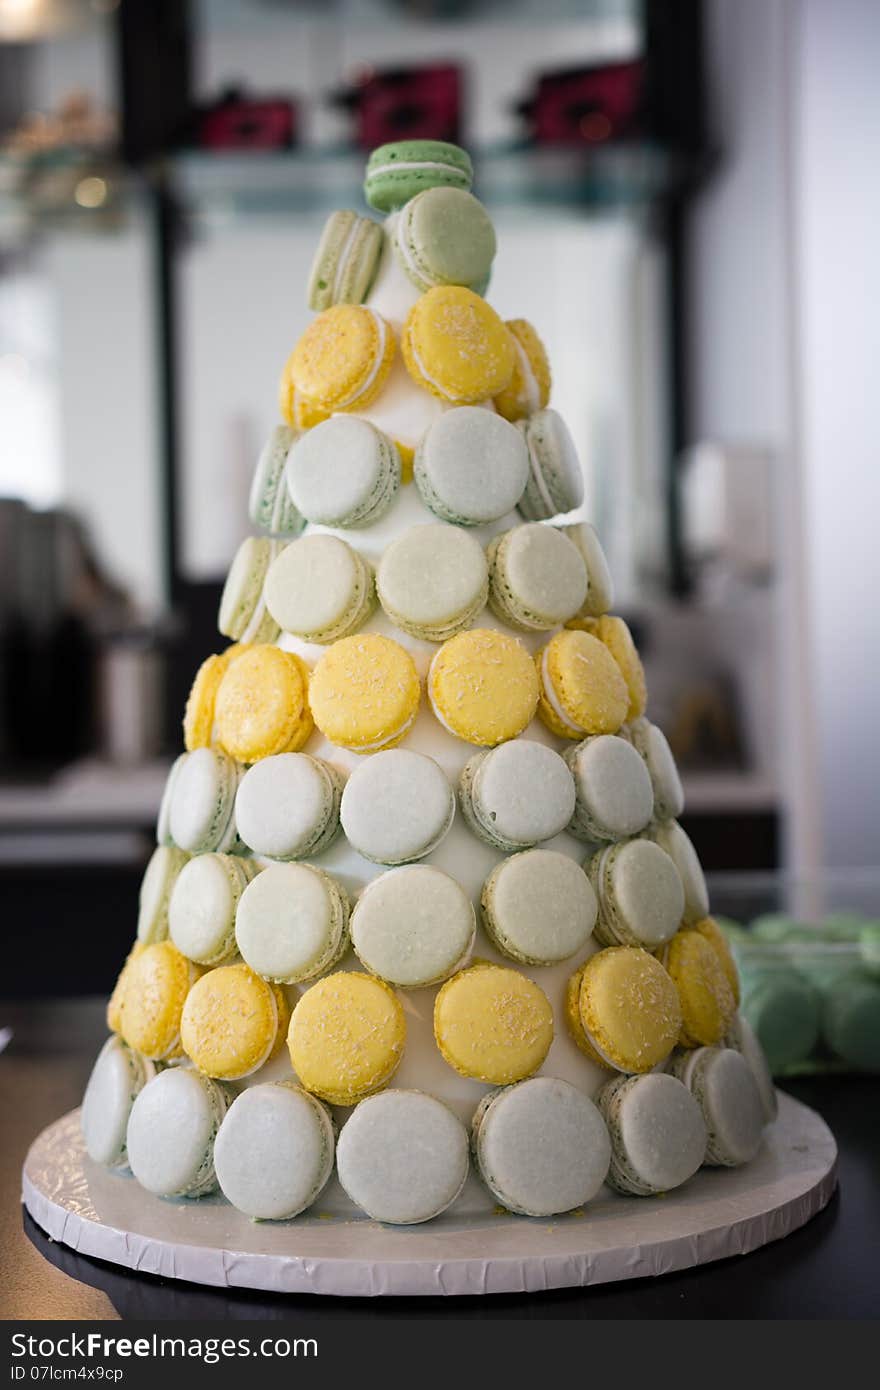 Macaron display as a Pyramid in a store. Macaron display as a Pyramid in a store.